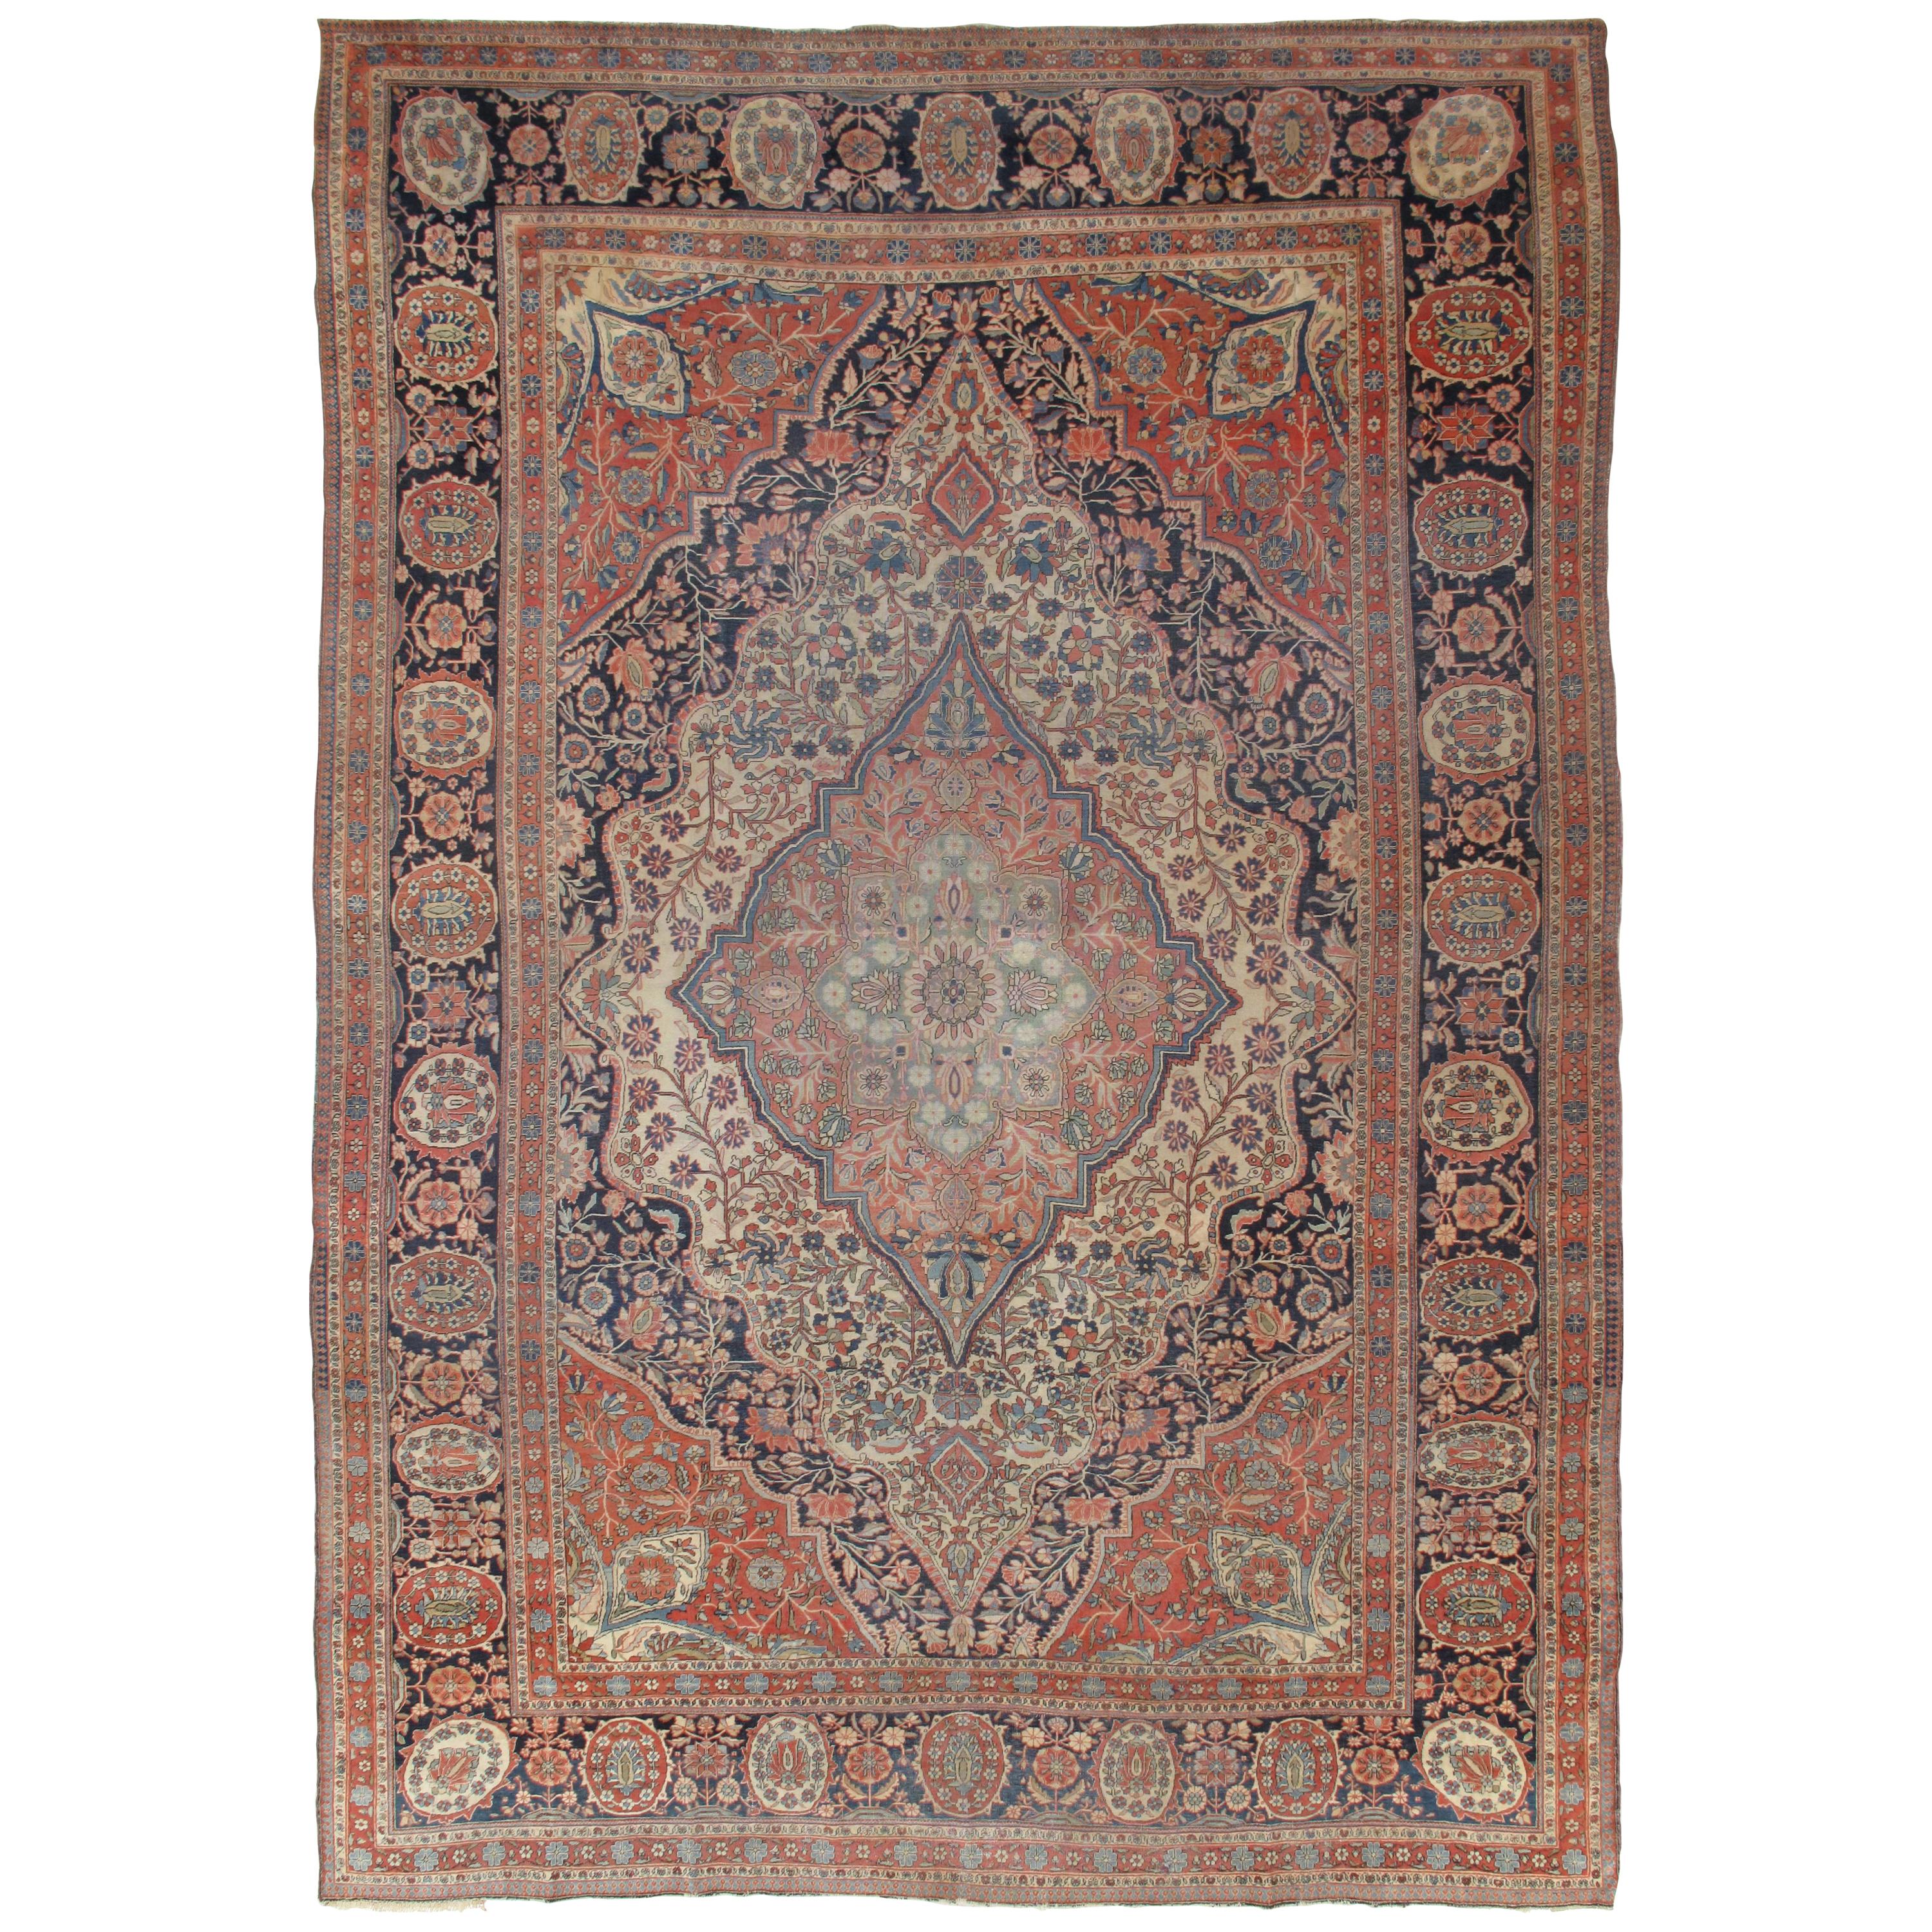 Antique Persian Mohtasham Kashan Carpet, Traditional, Ivory, Blue, Green, Reds For Sale